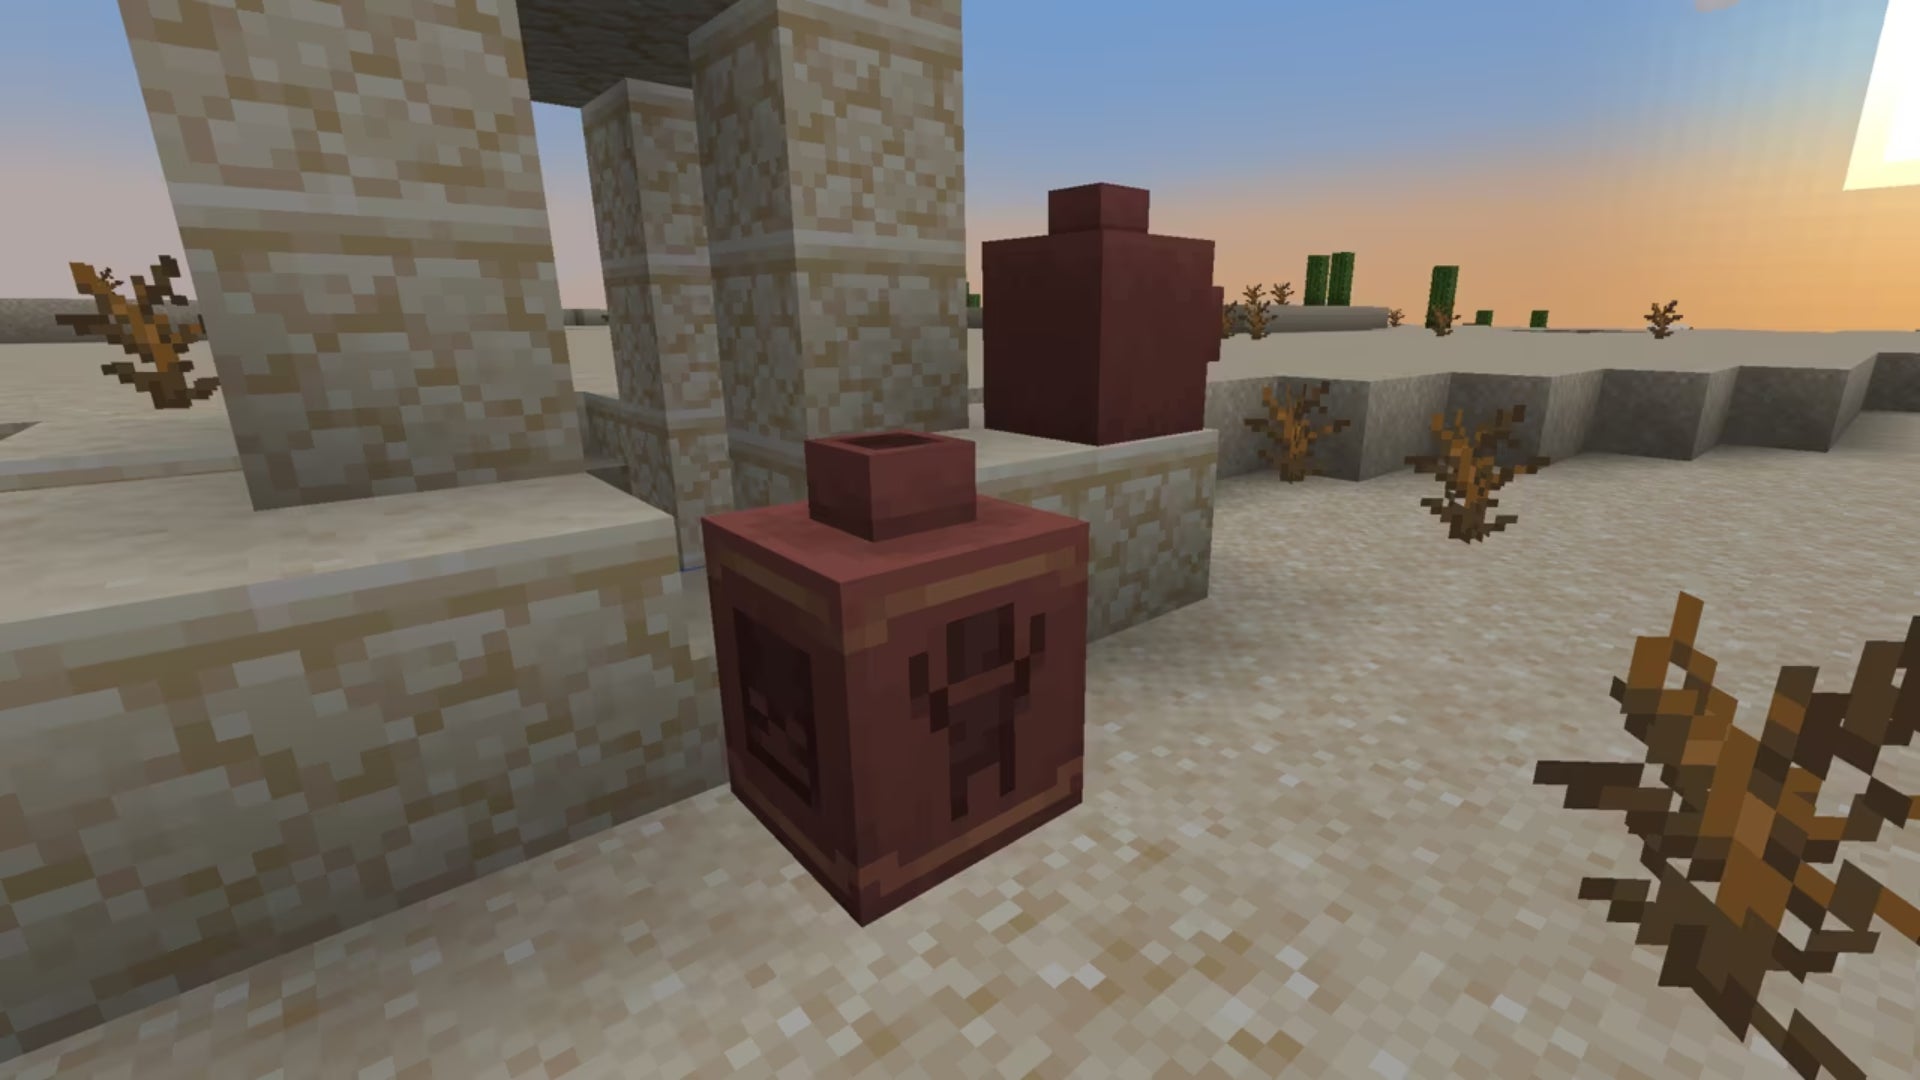 Two Minecraft Pots made out of excavated Pottery Shards near a sandstone build in a desert.